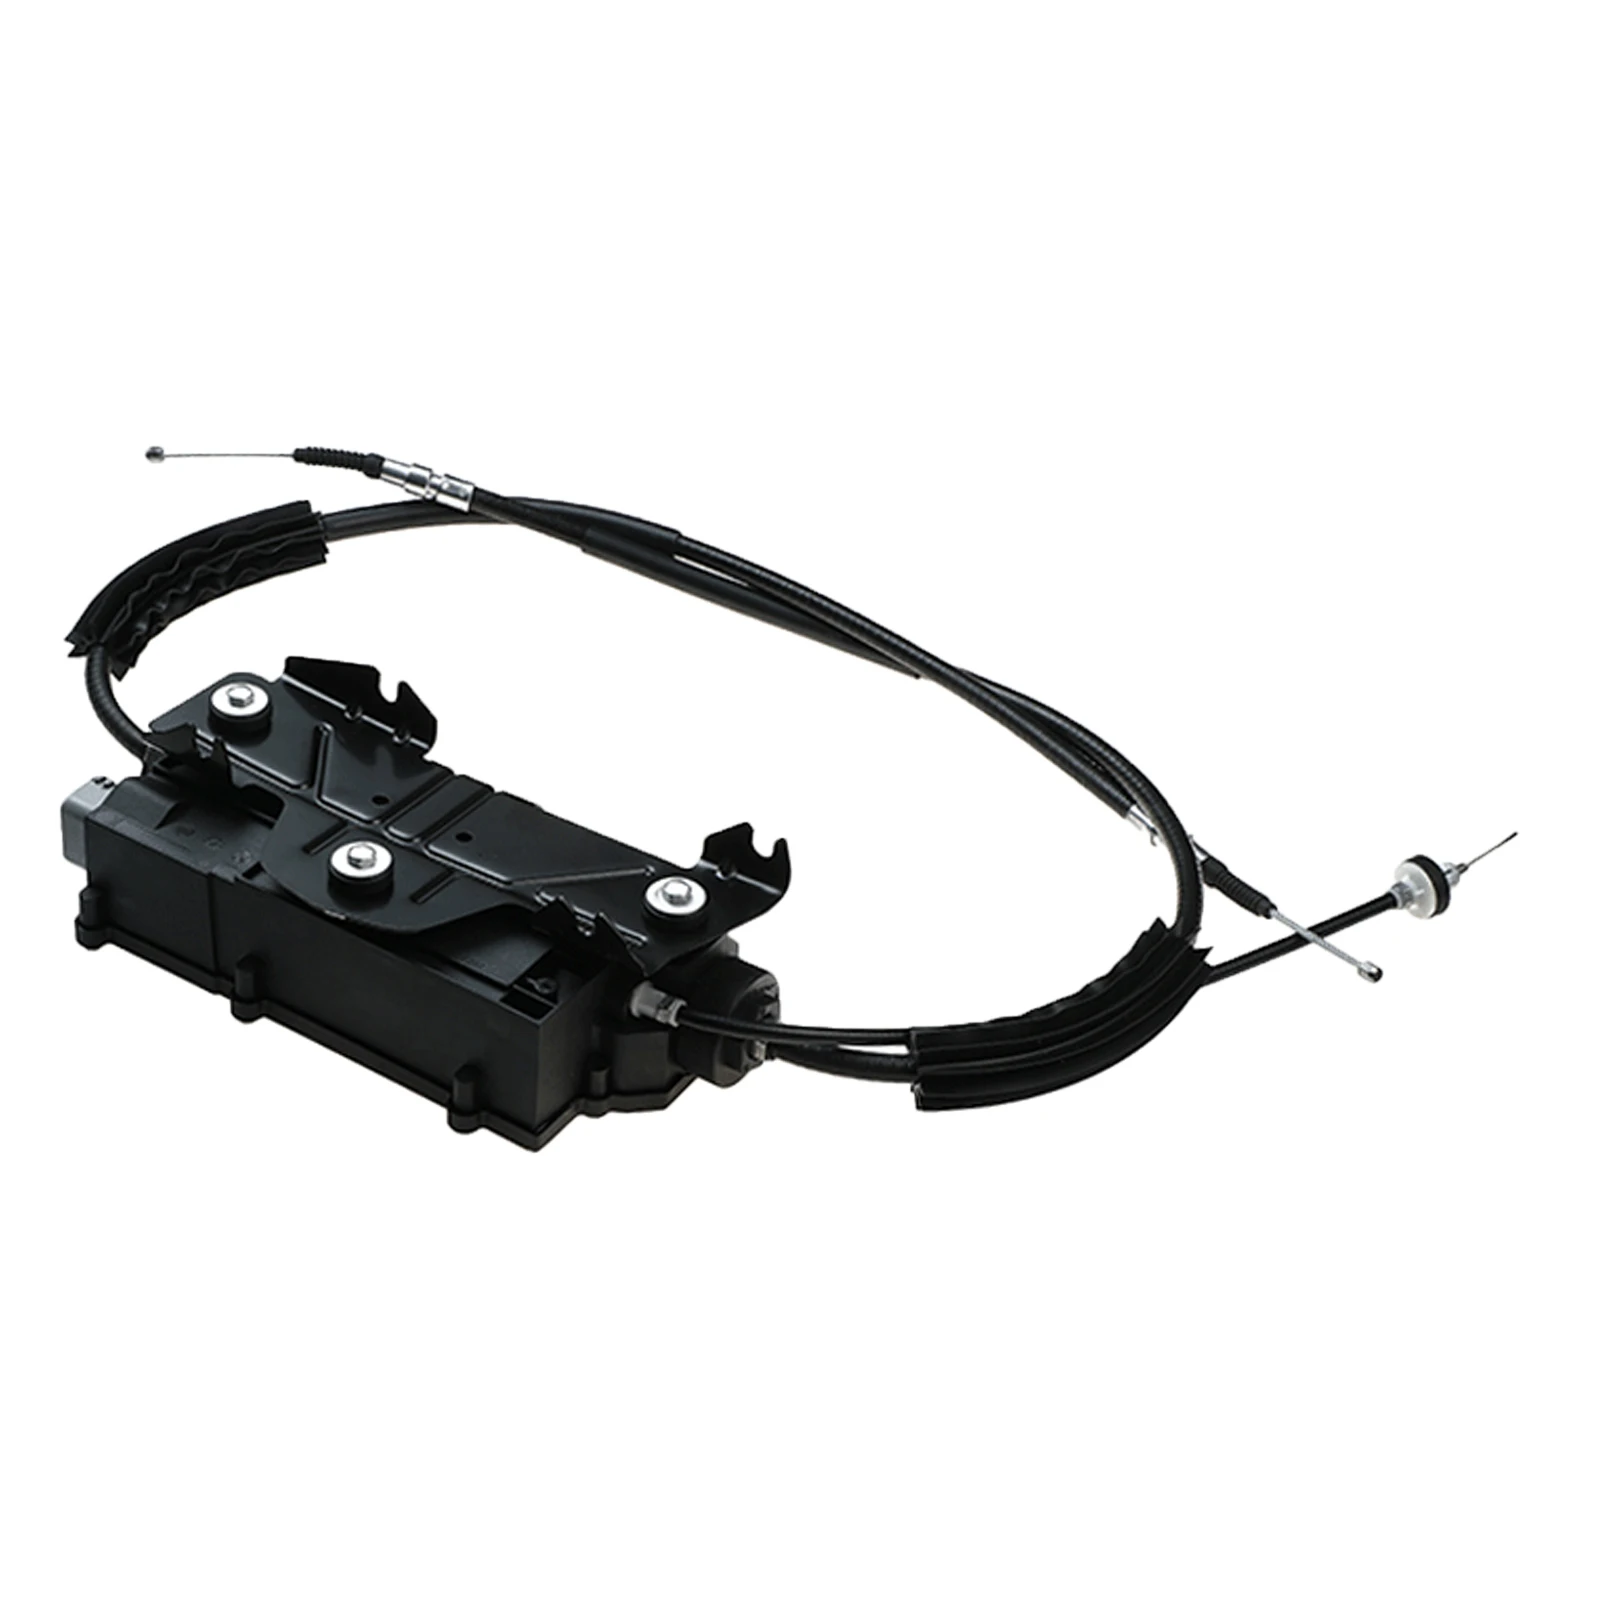 Park Brake Module, Hand Brake Actuator, Parking Brake Actuator With Control Unit, Fit for BMW 5 Series GT F07 09-16